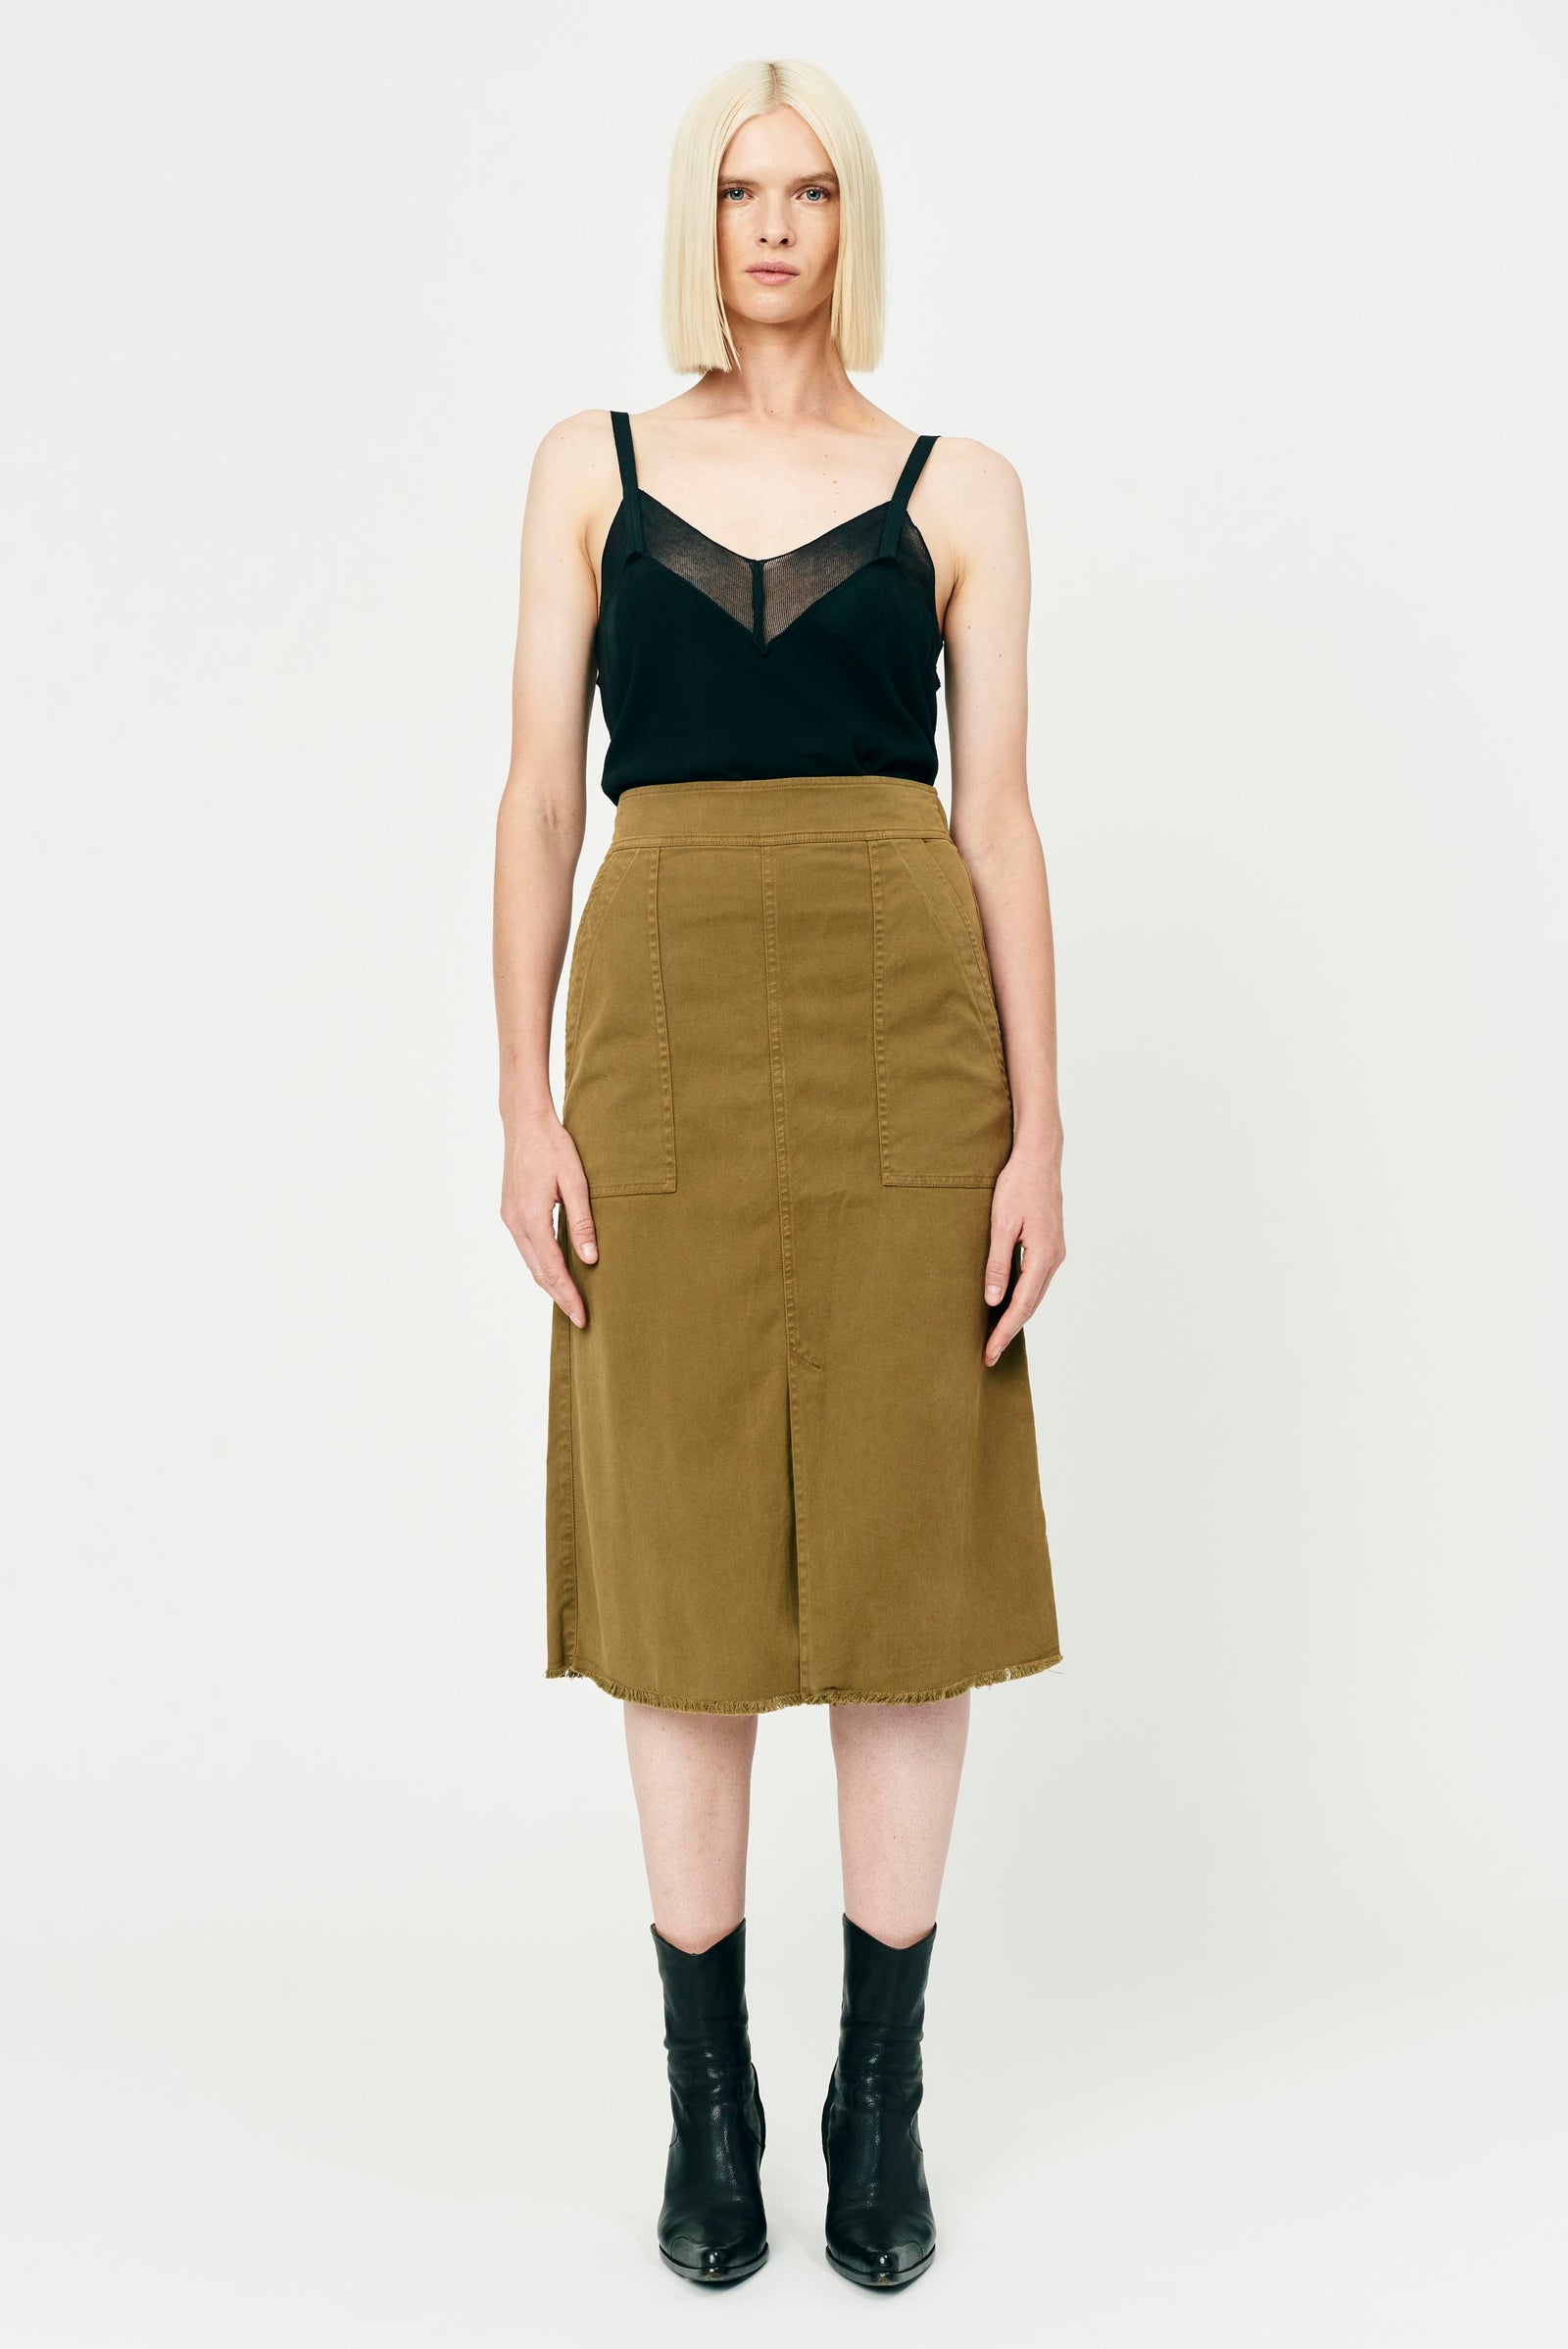 Tobacco Rancho Work Wear Skirt Full Front View